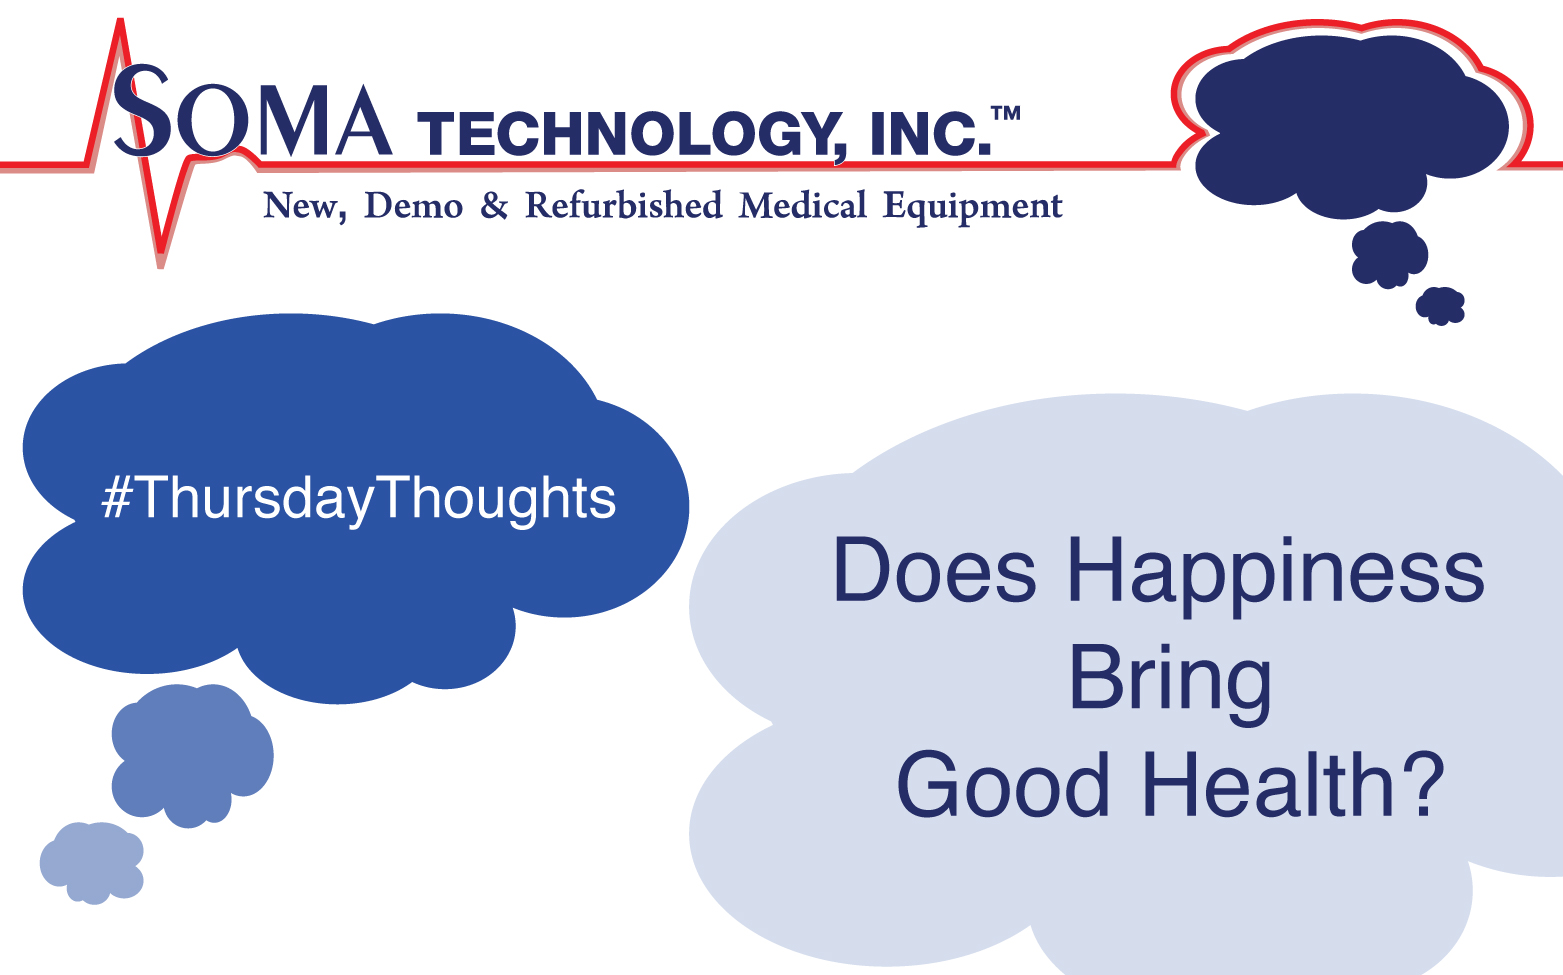 Happiness is Healthy - Soma Technology, Inc.